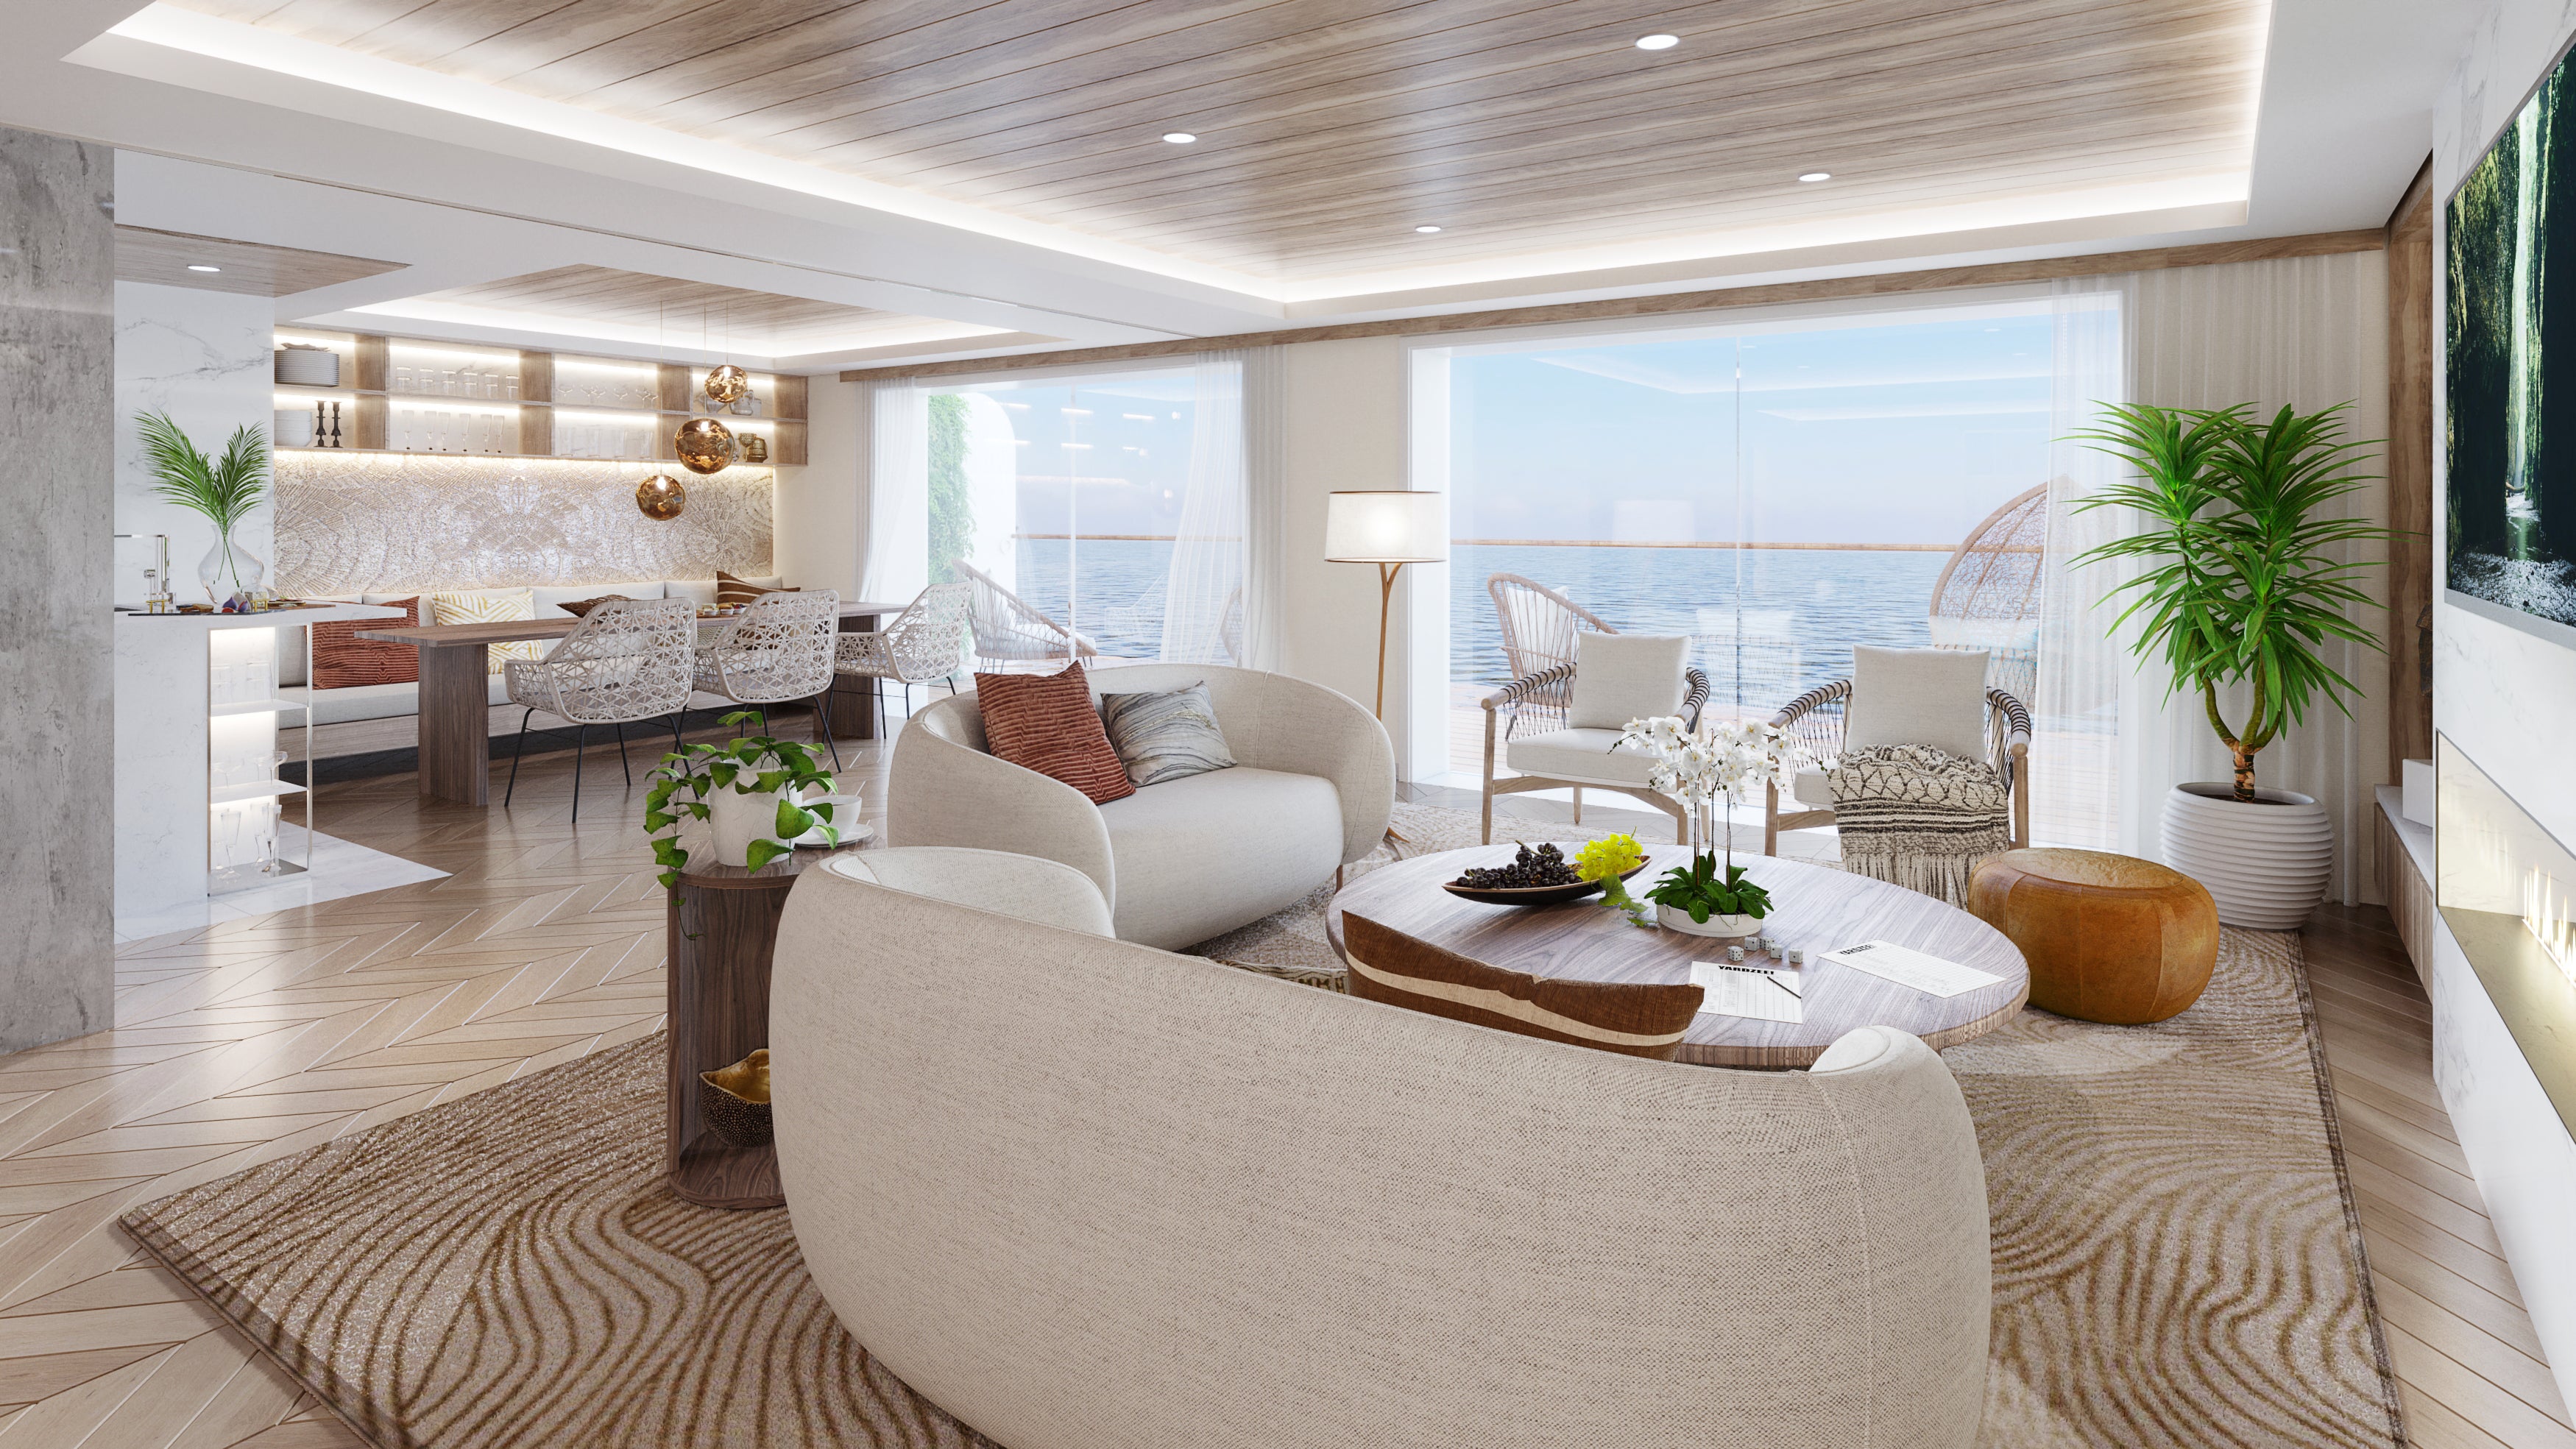 This sample residence is just one of 500 private rooms and apartments onboard the MV Narrative